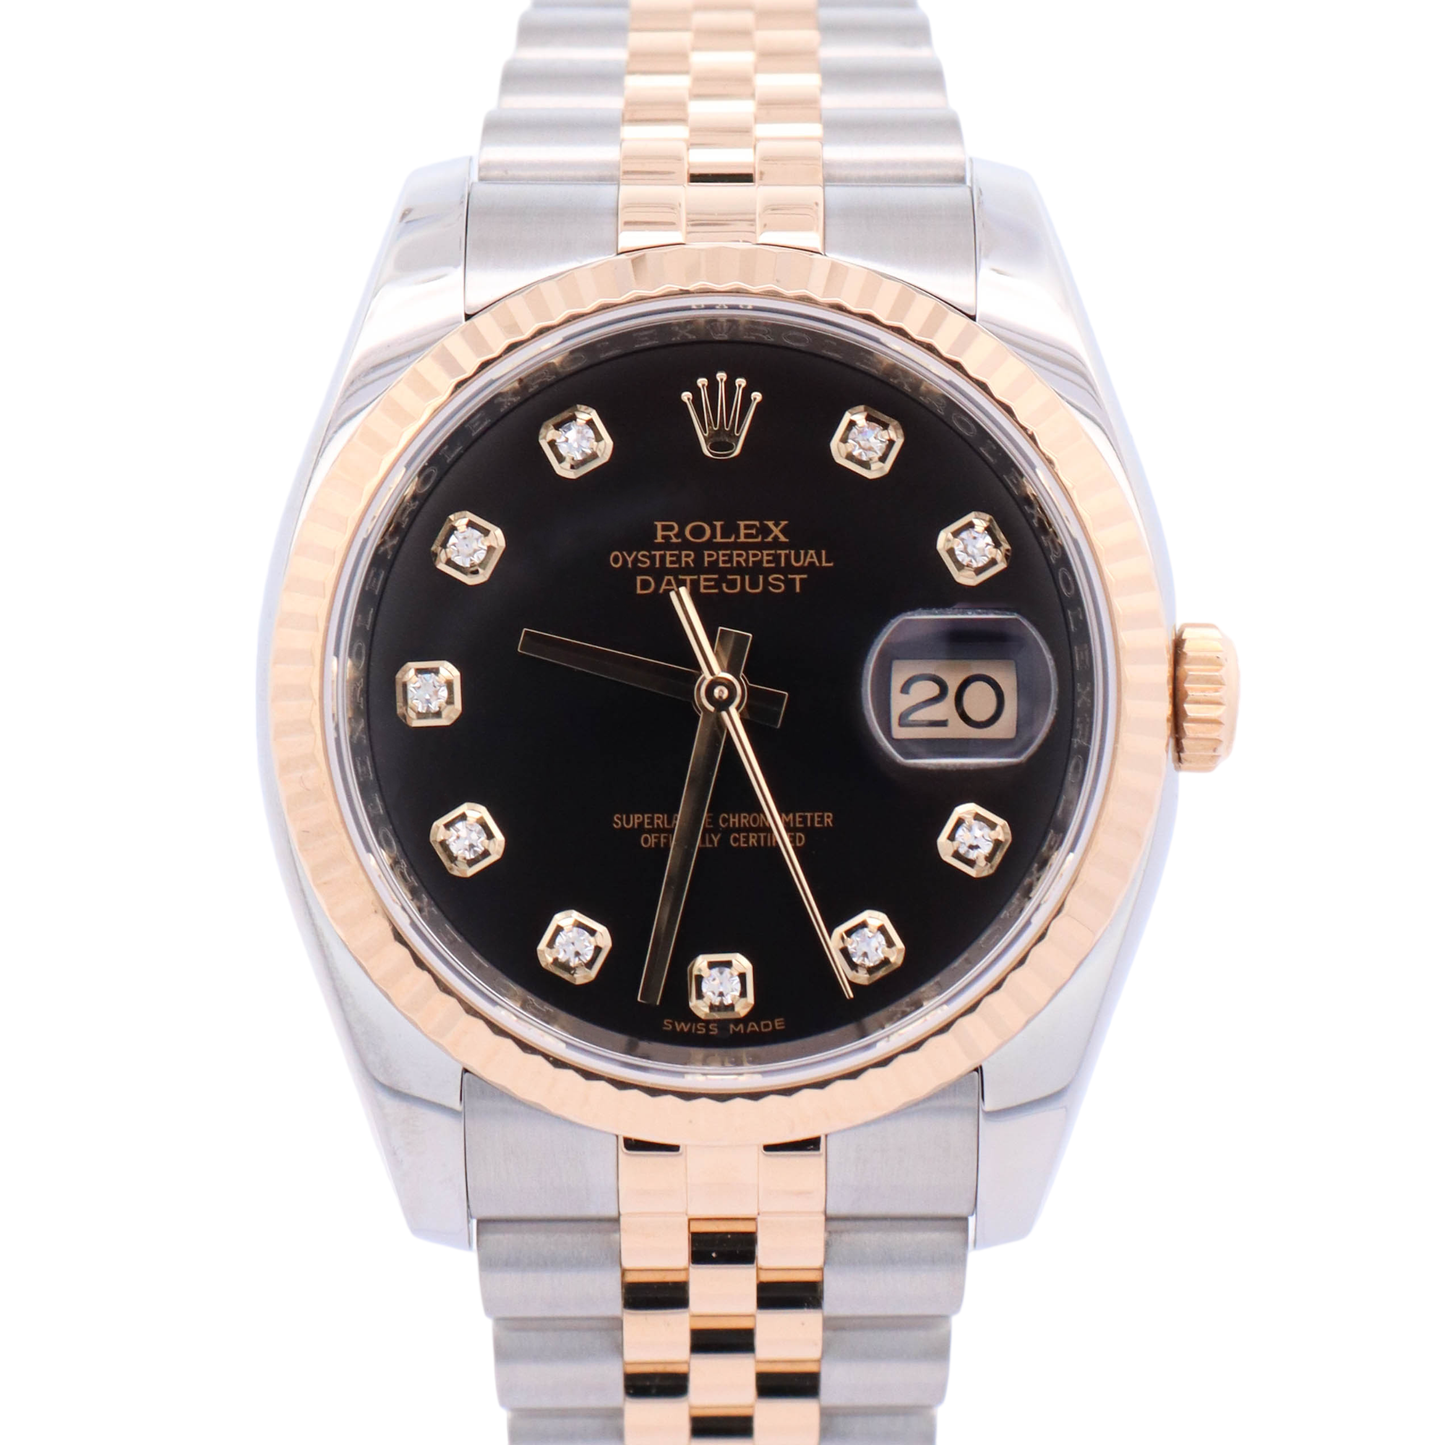 Rolex Datejust 36mm Yellow Gold & Steel Factory Black Diamond Dial Watch Reference# 116233